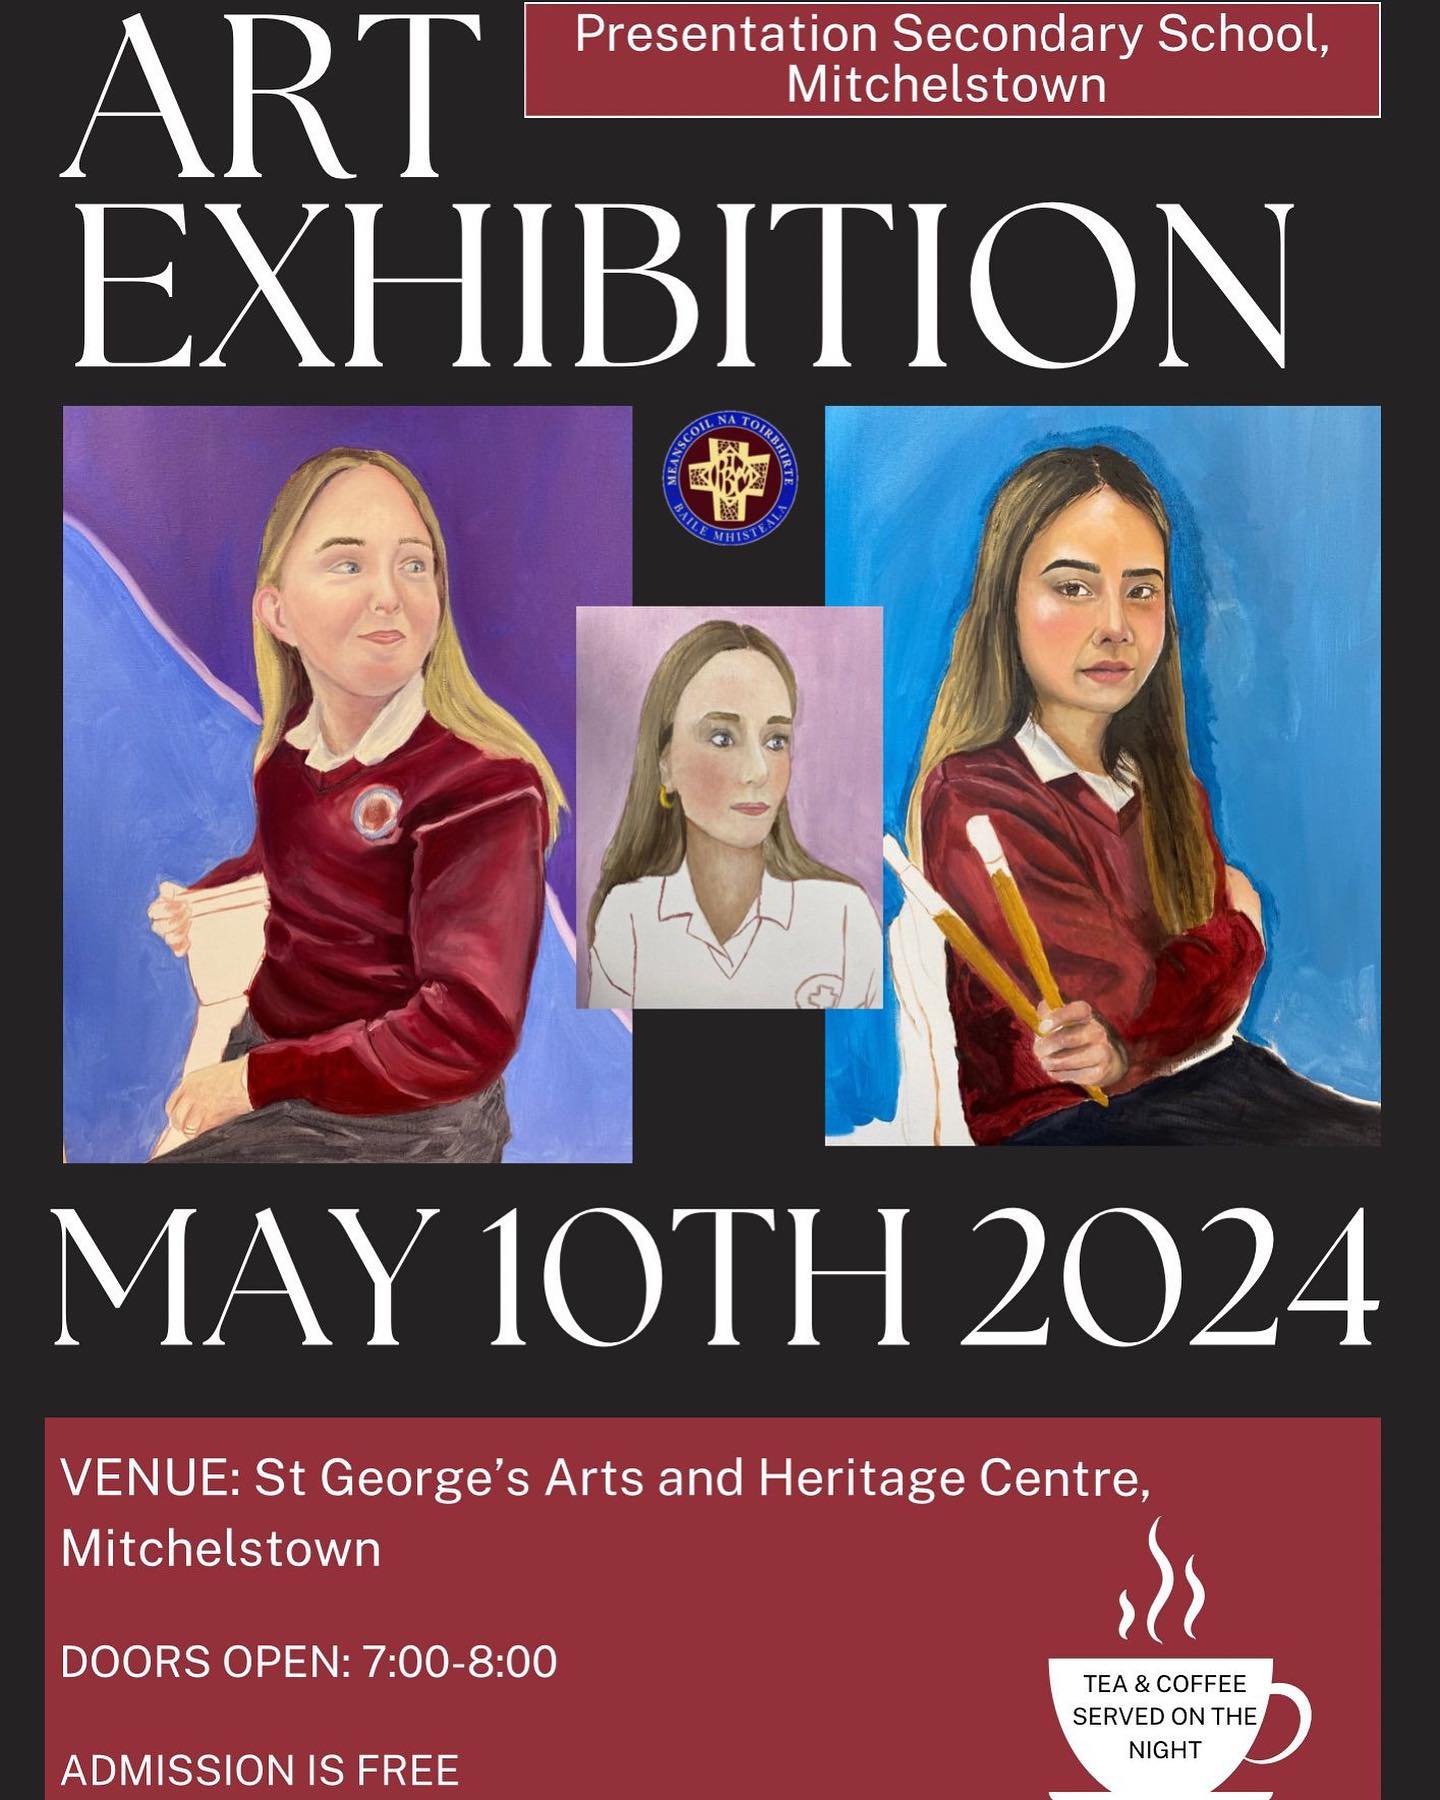 ART EXHIBITION!! We are very excited to announce that we are having an Art exhibition to showcase the incredible self portraits created by our talented 5th year Art class. This project is a creative engagement initiative, which seeks to promote the A